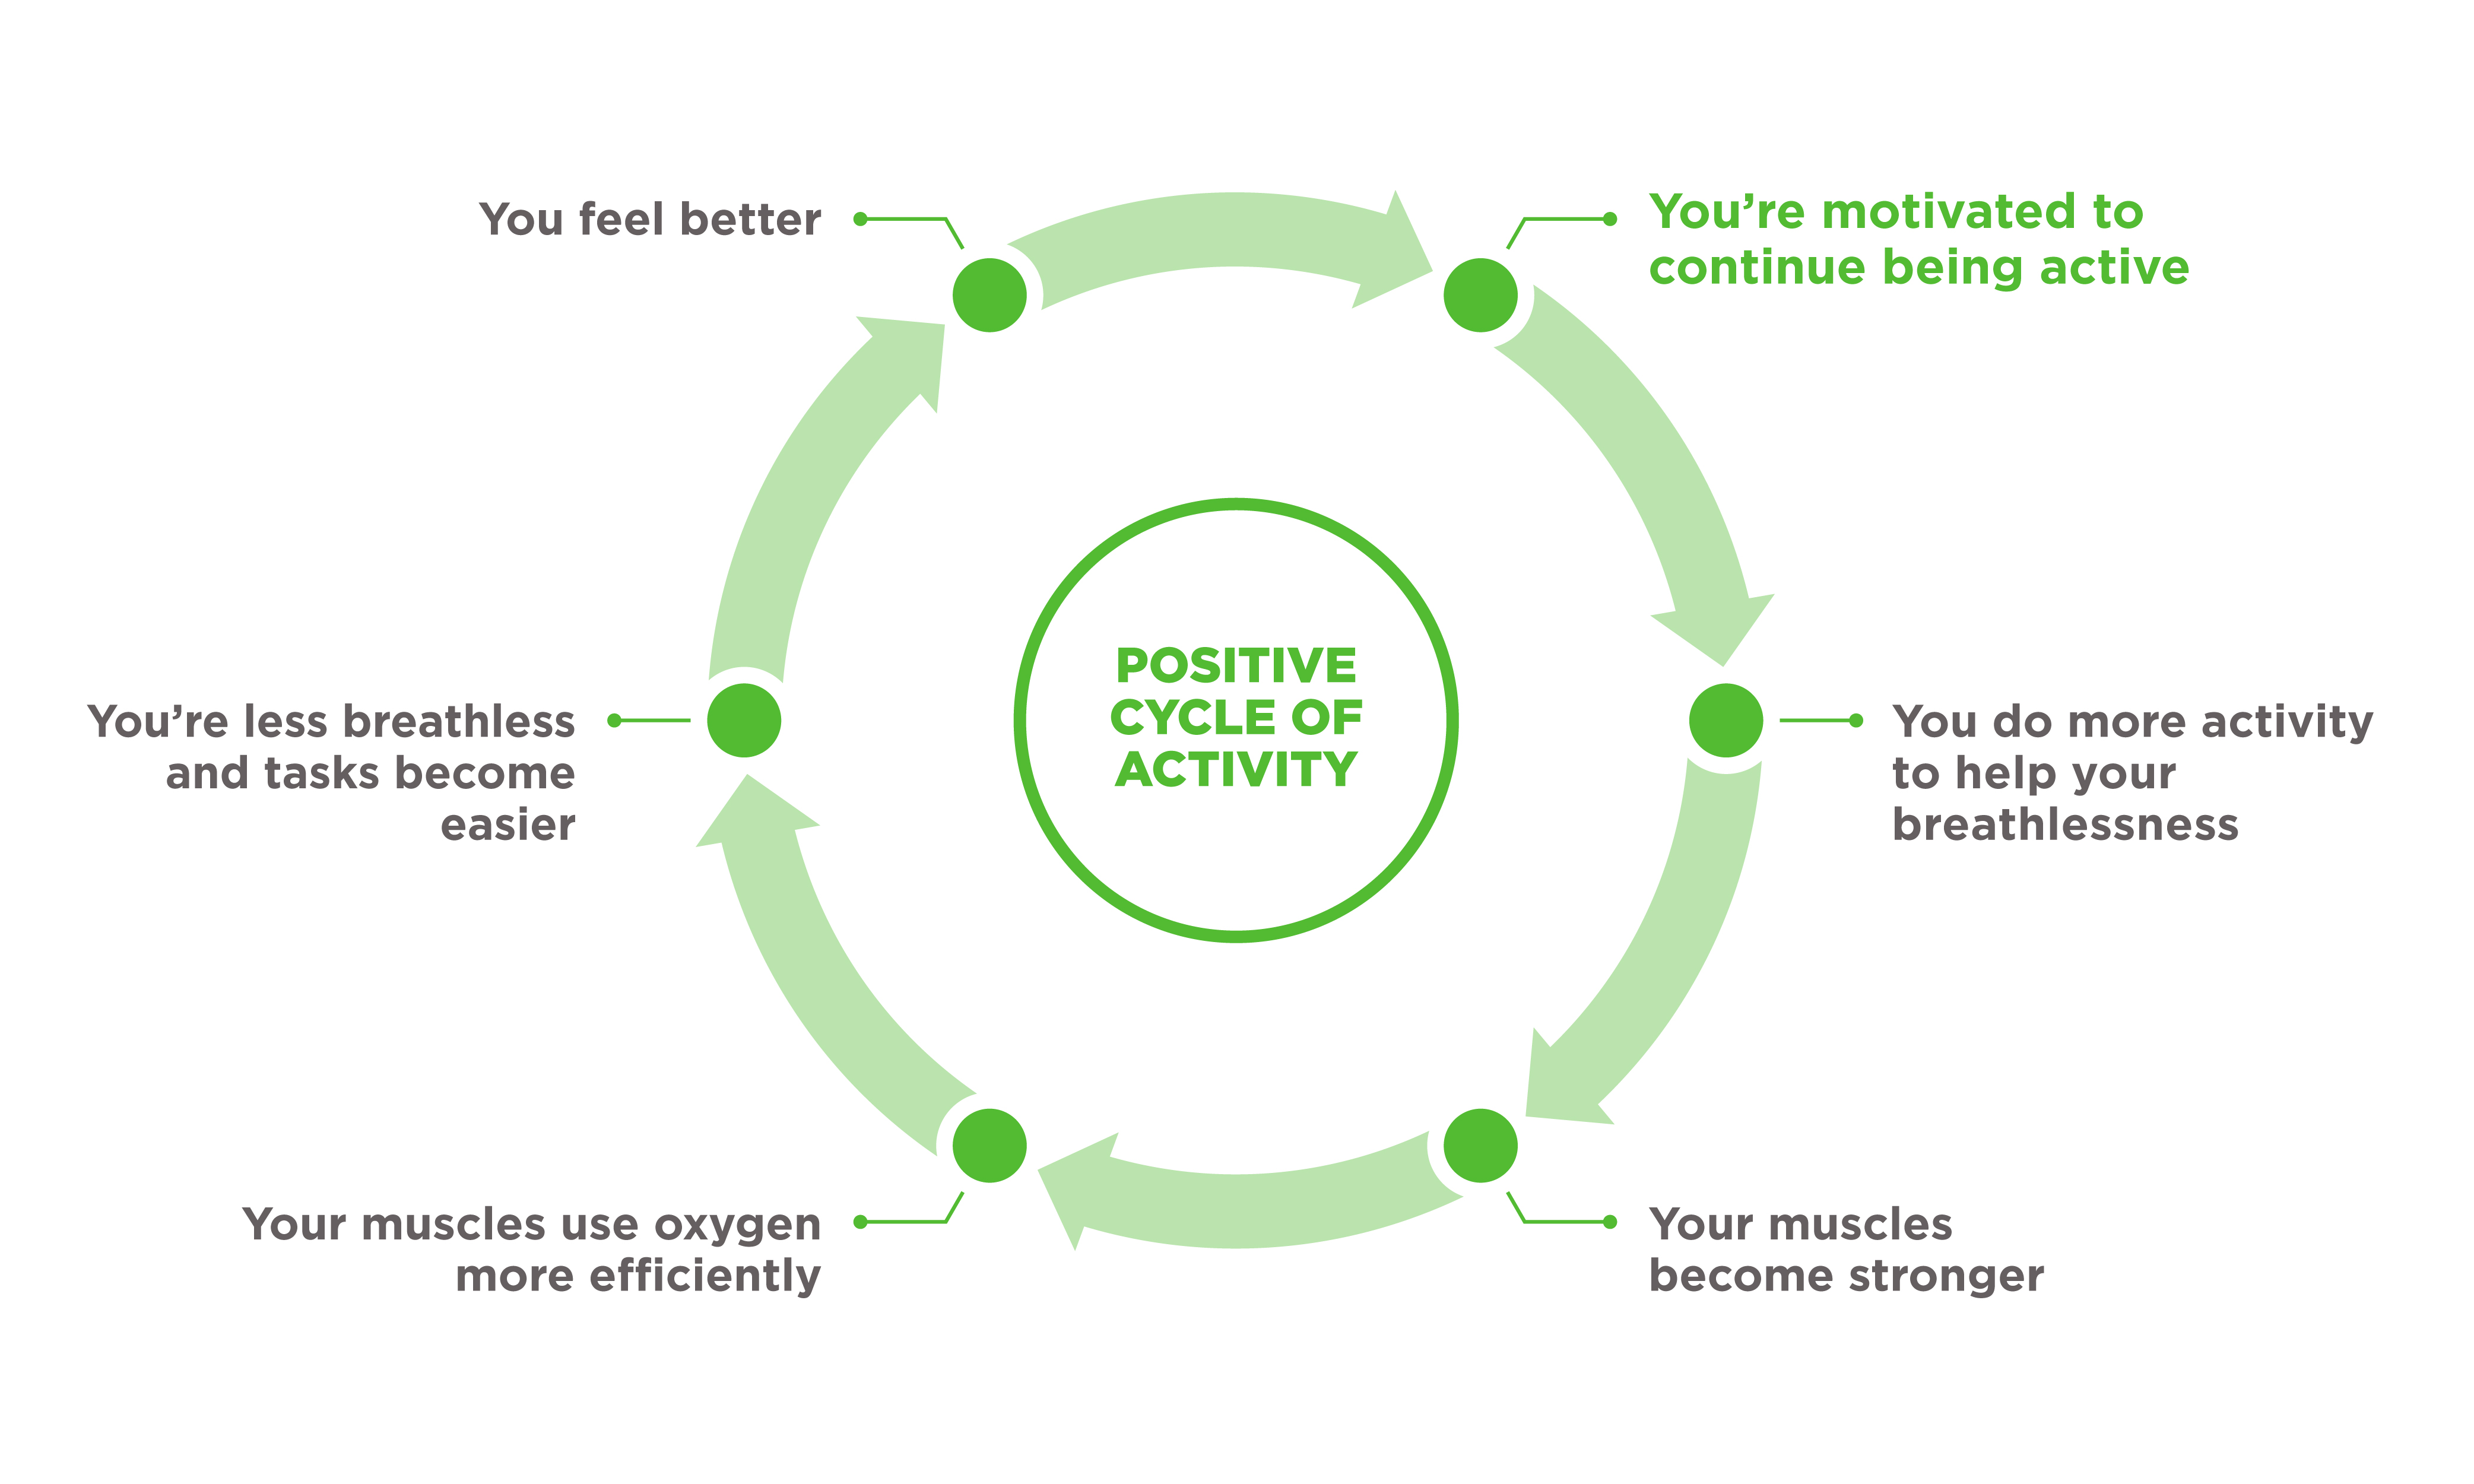 Positive cycle of activity